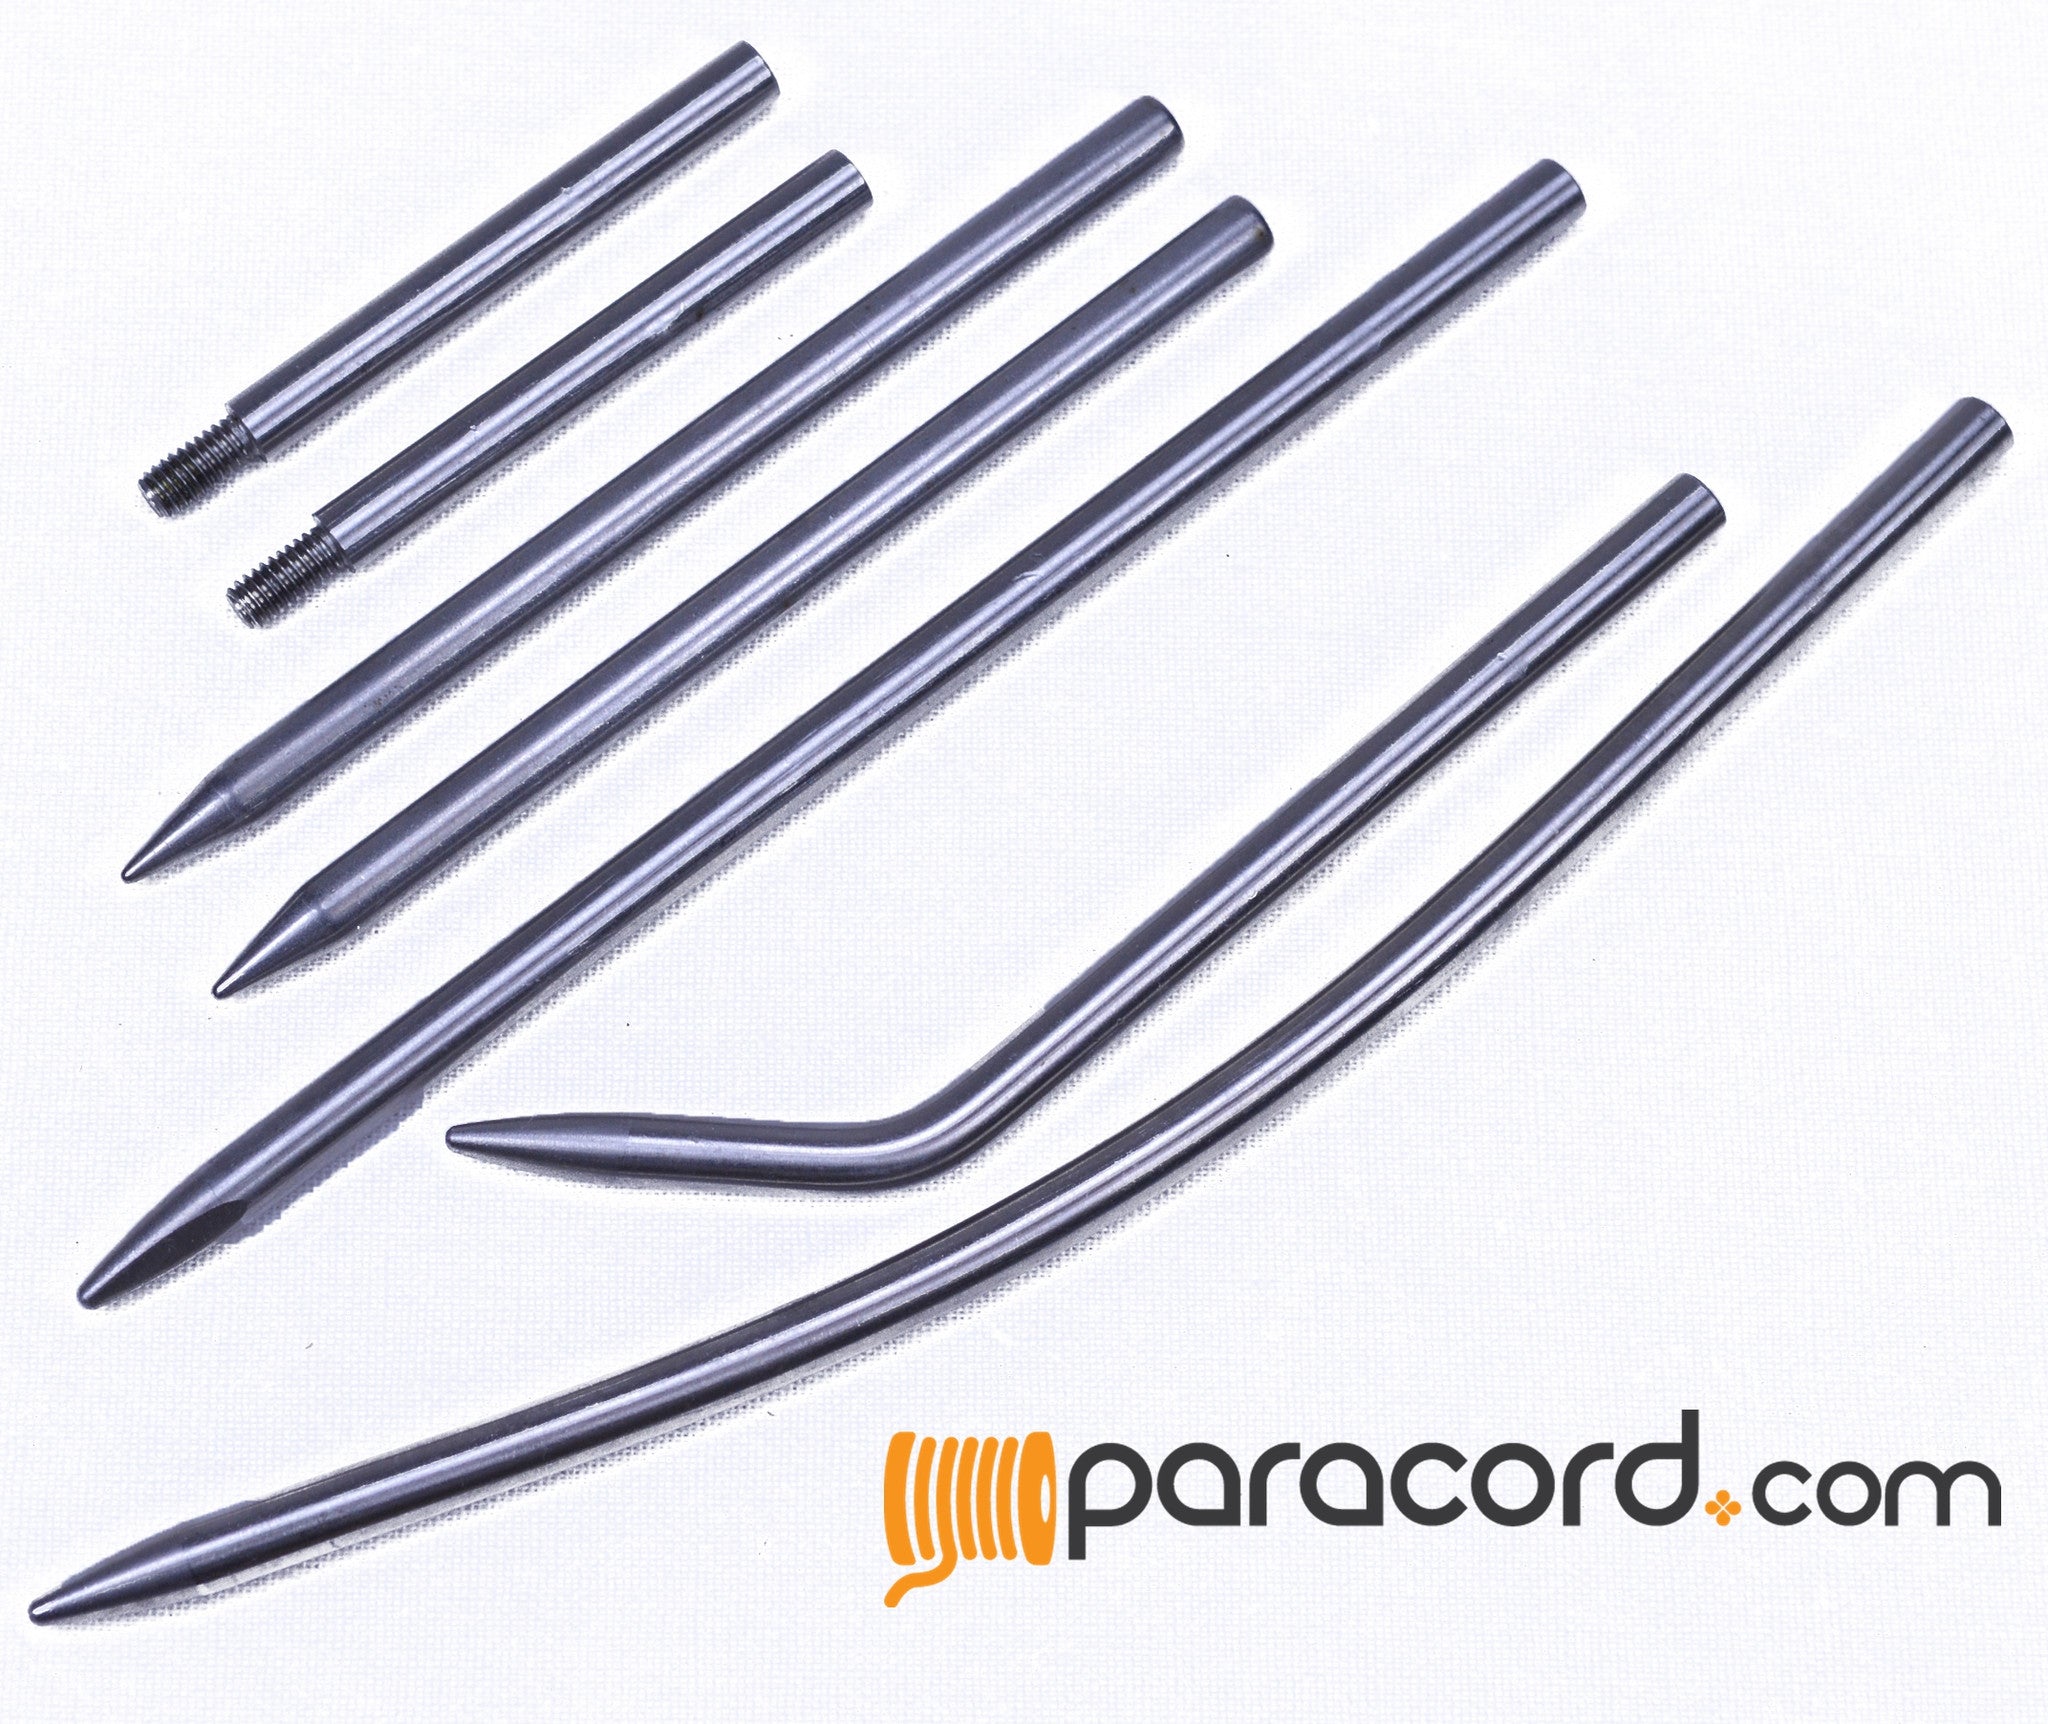 Ferraycle 12 Pieces Paracord FID Set Stainless Steel Knotter Tools  Marlinspike Set Paracord Stitching Lacing Stitching Needles and Smoothing  Tool